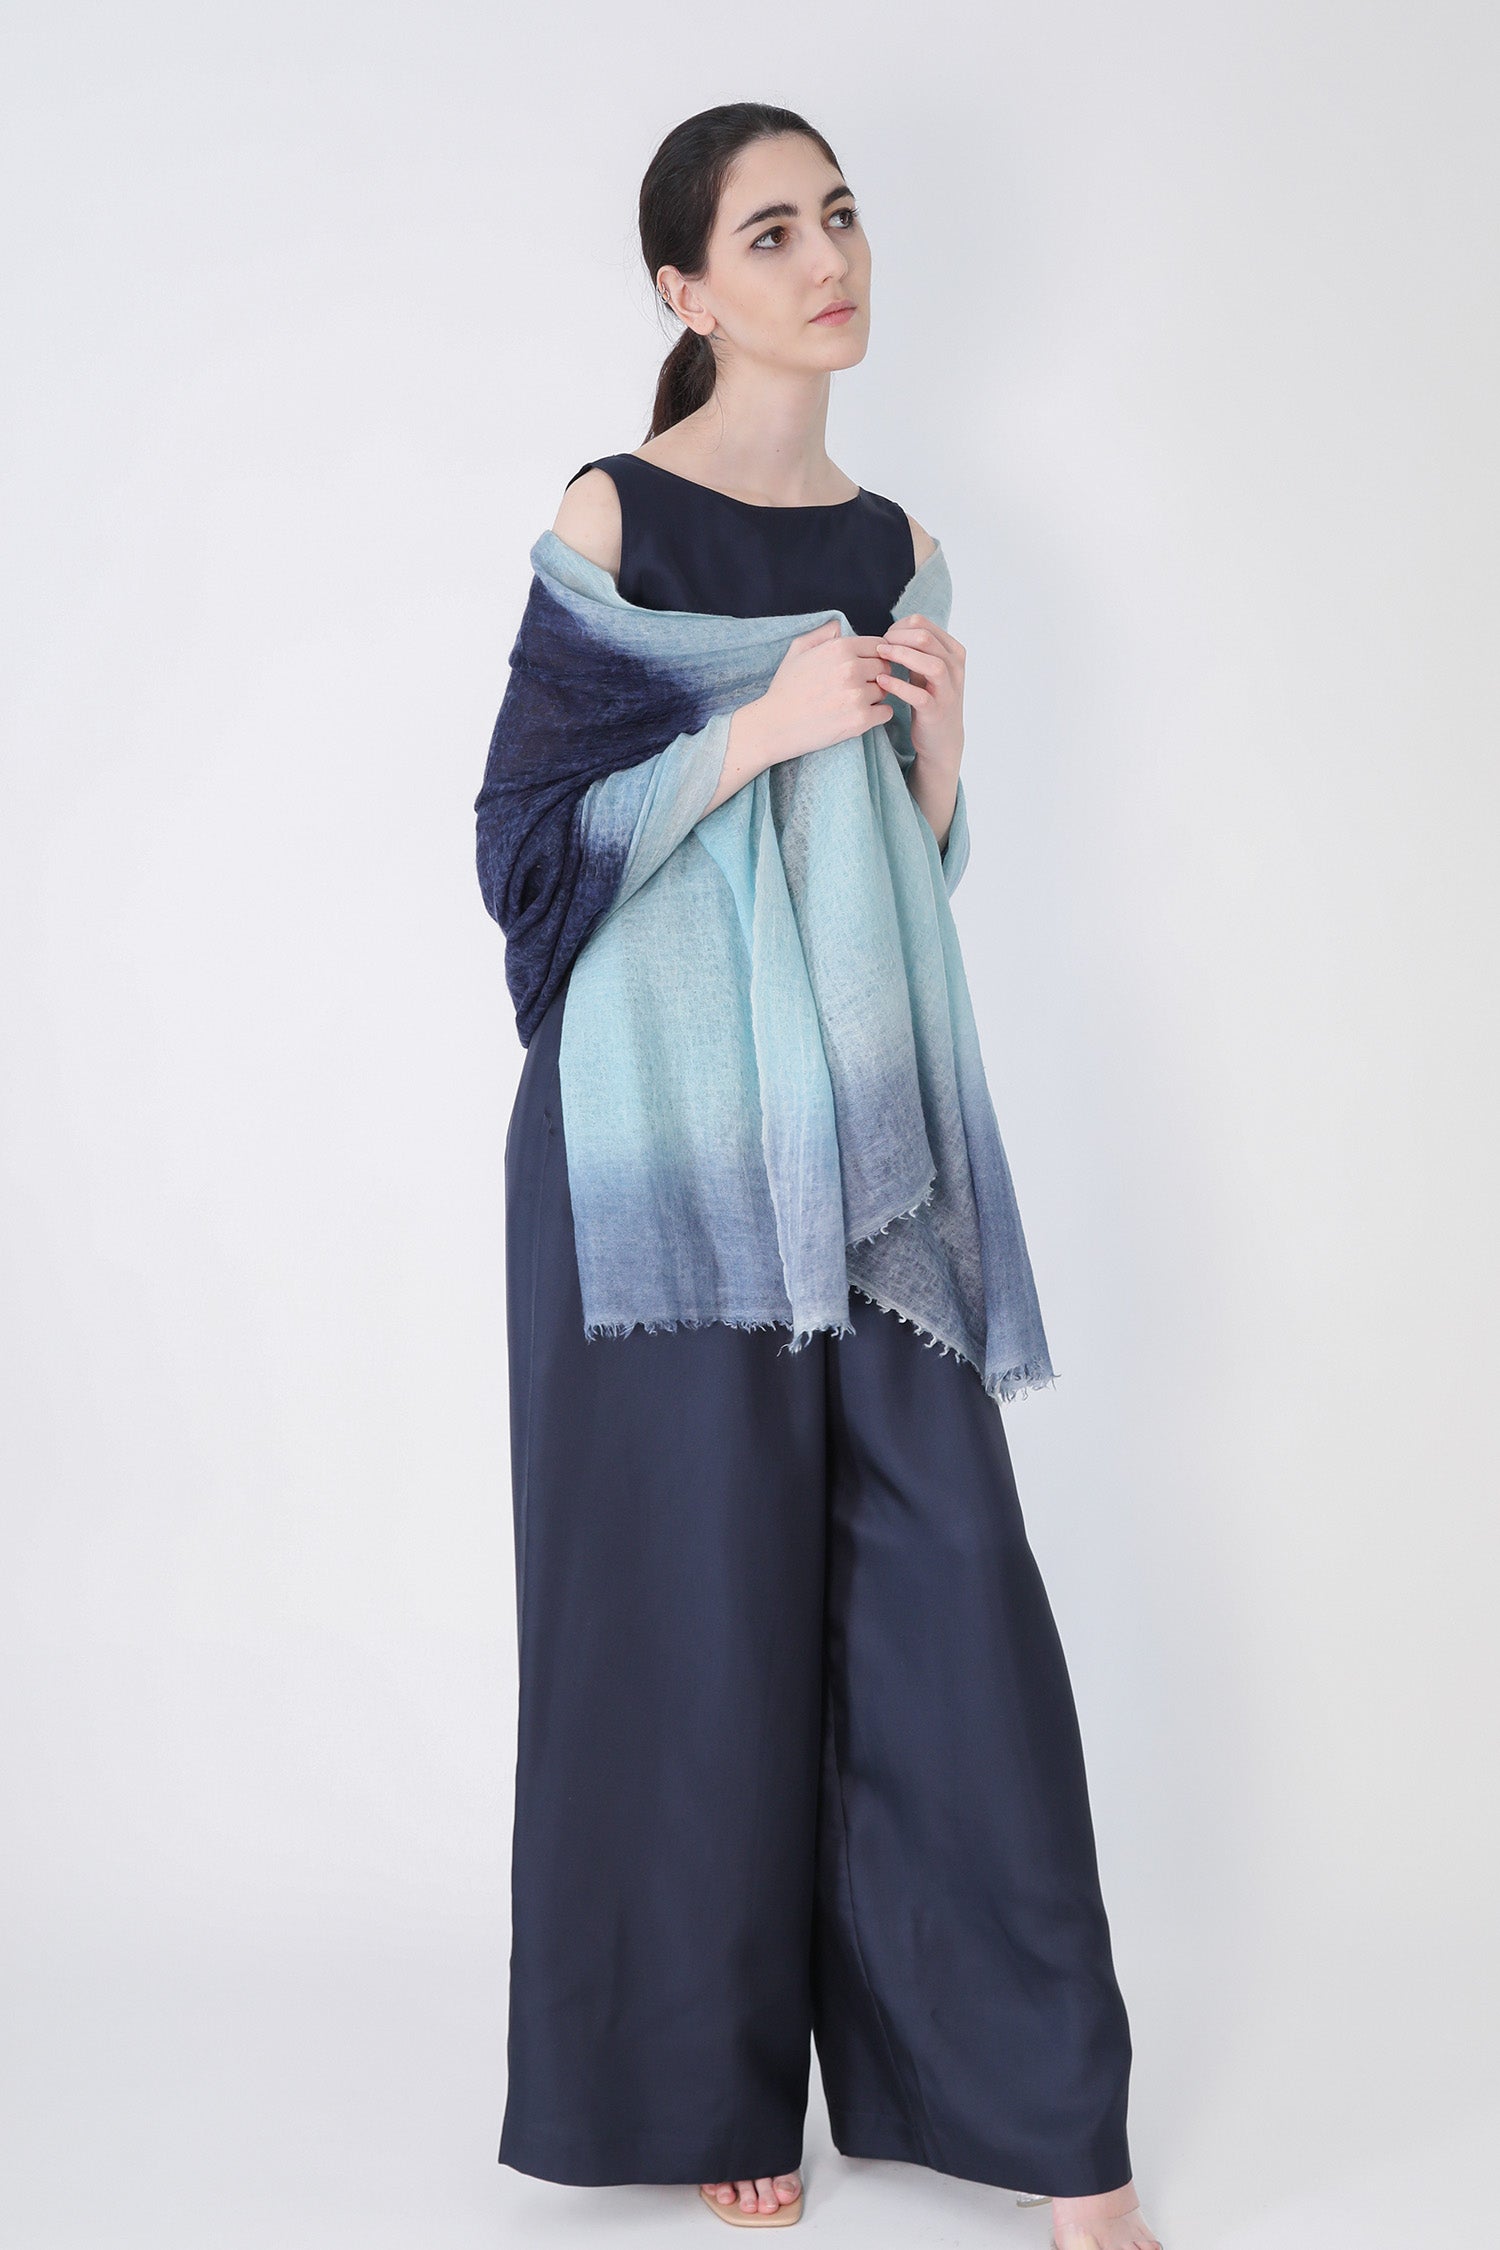 NAVY DEEP SCARF IN HAND DYED CASHMERE